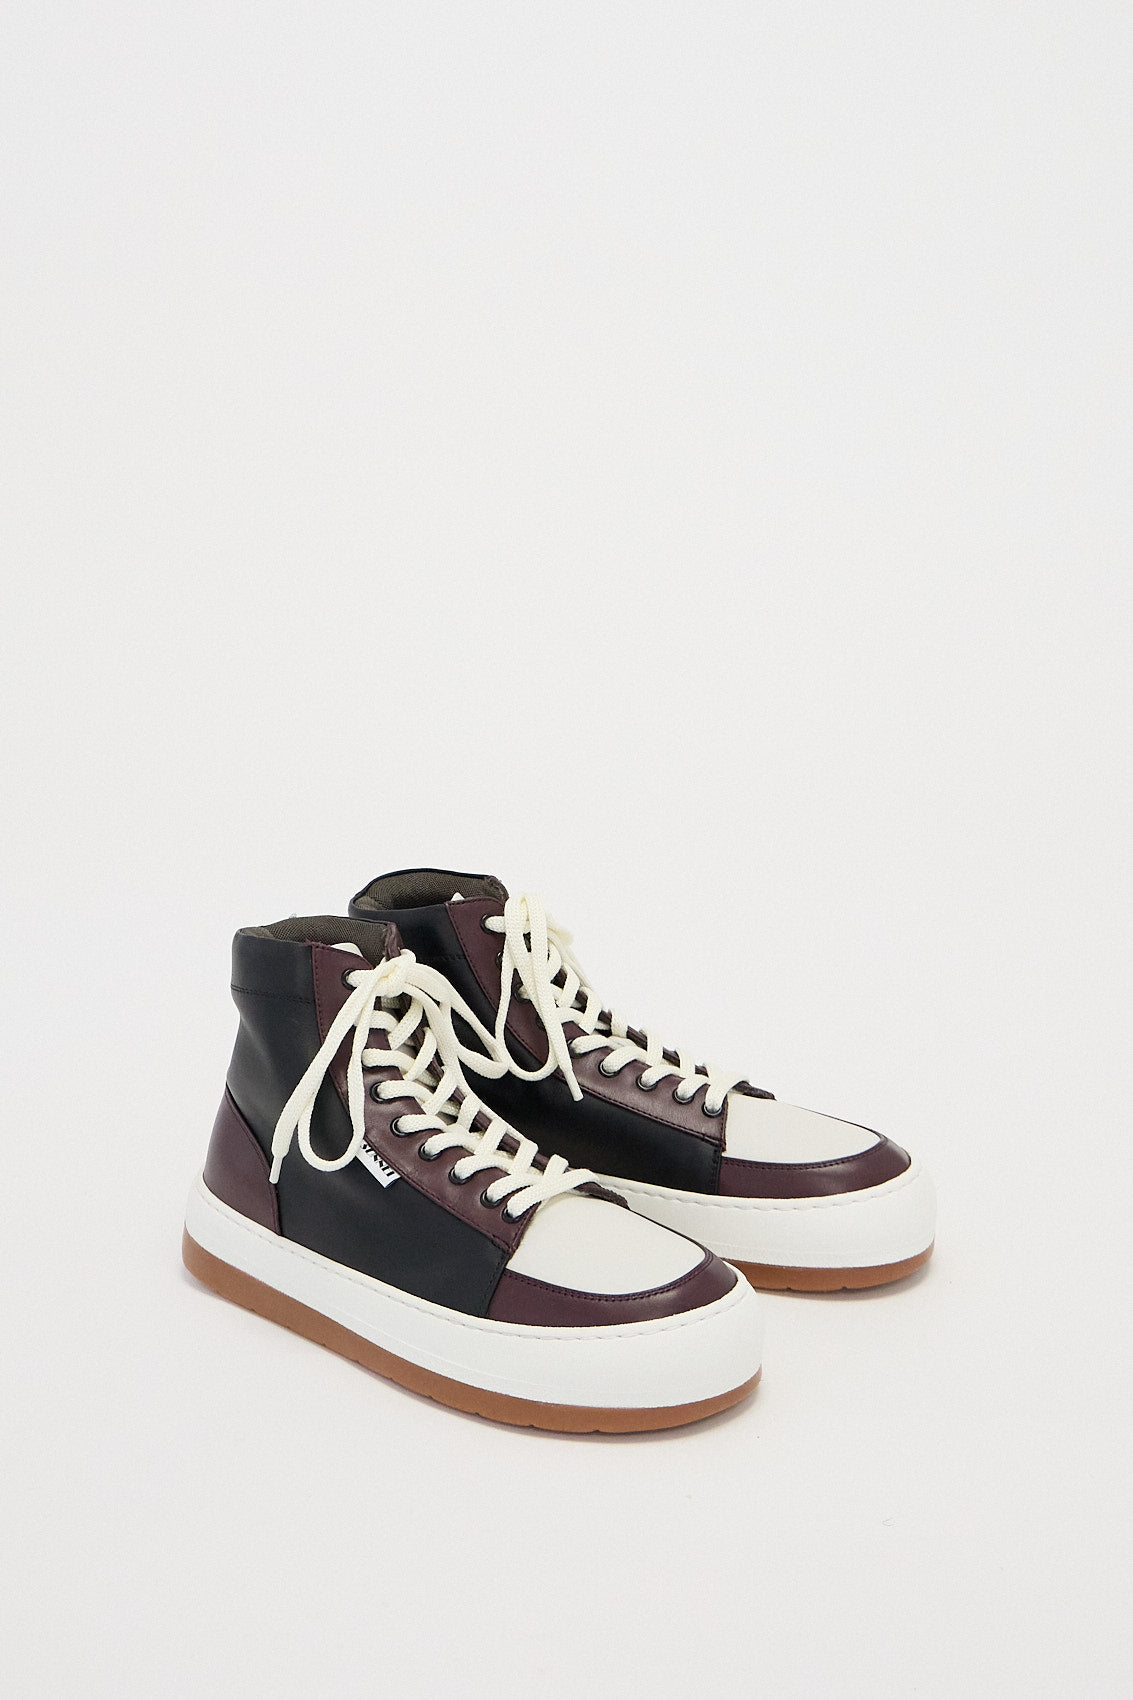 HIGH TOP DREAMY SHOES / leather / black & white